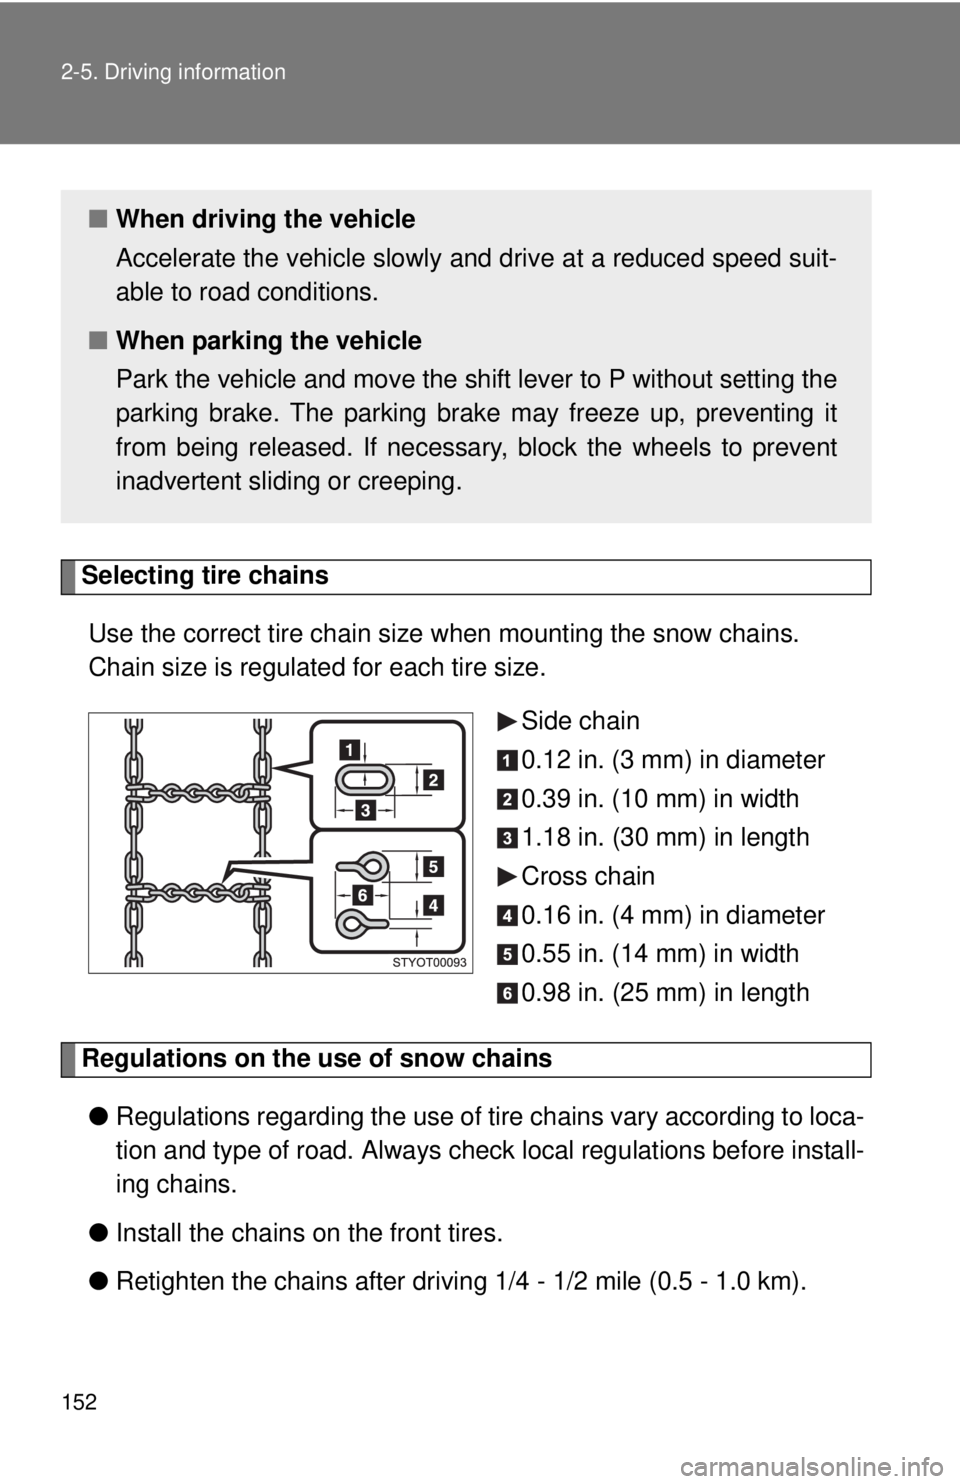 TOYOTA IQ 2014  Owners Manual 152 2-5. Driving information
Selecting tire chainsUse the correct tire chain size  when mounting the snow chains. 
Chain size is regulated for each tire size.
Side chain
0.12 in. (3 mm) in diameter
0.